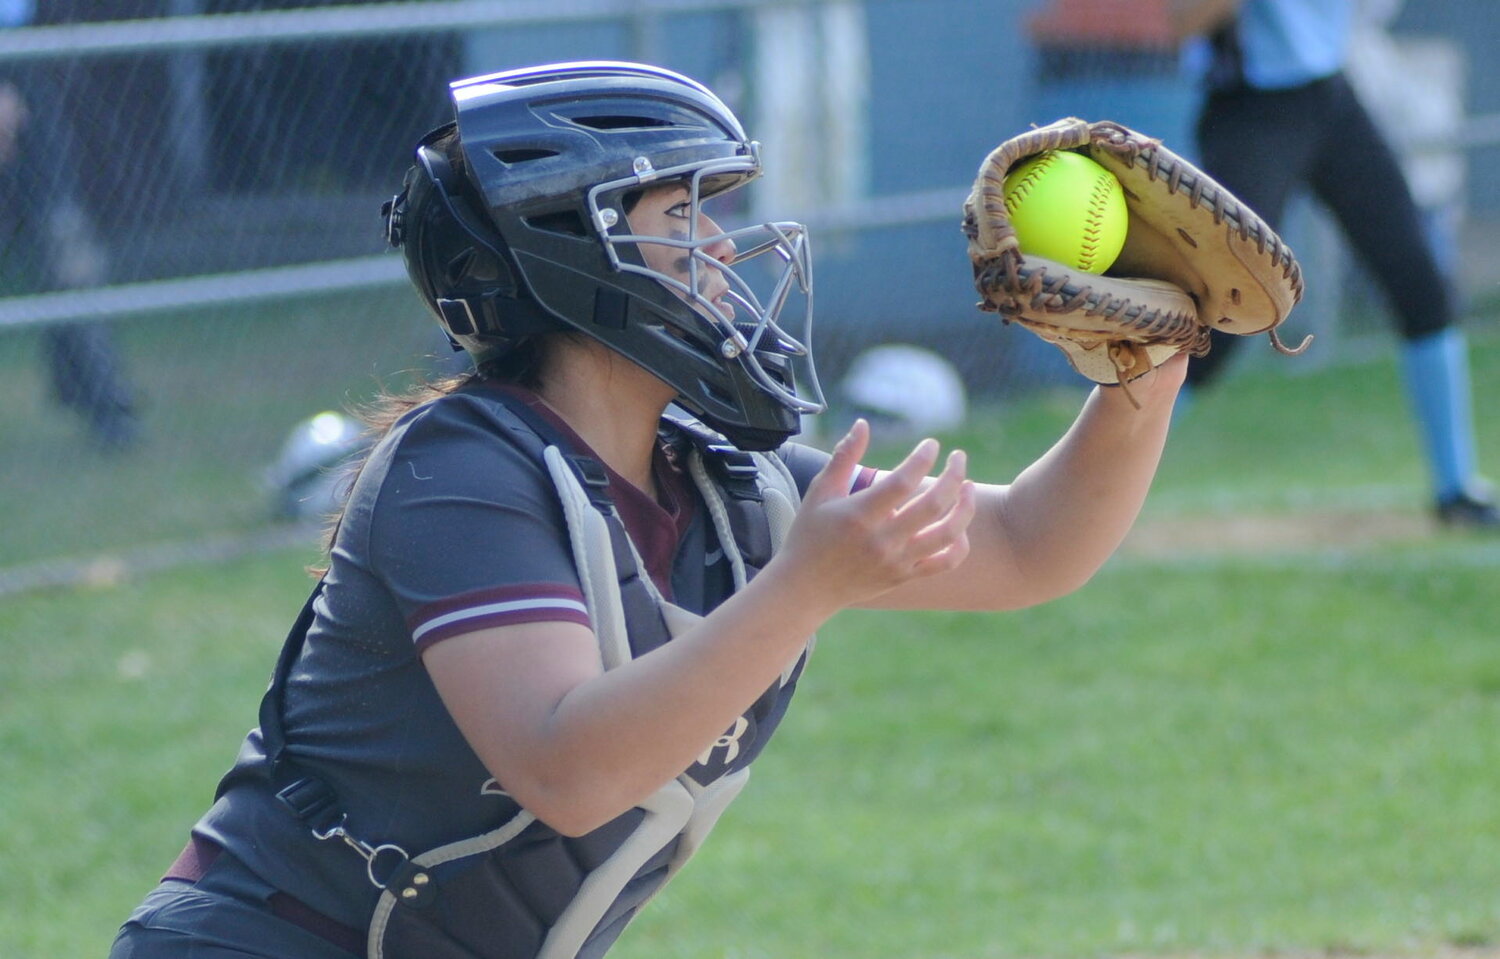 Special delivery. Manor’s catcher, Jocelyn Mills, reels in Carlson’s pitch.